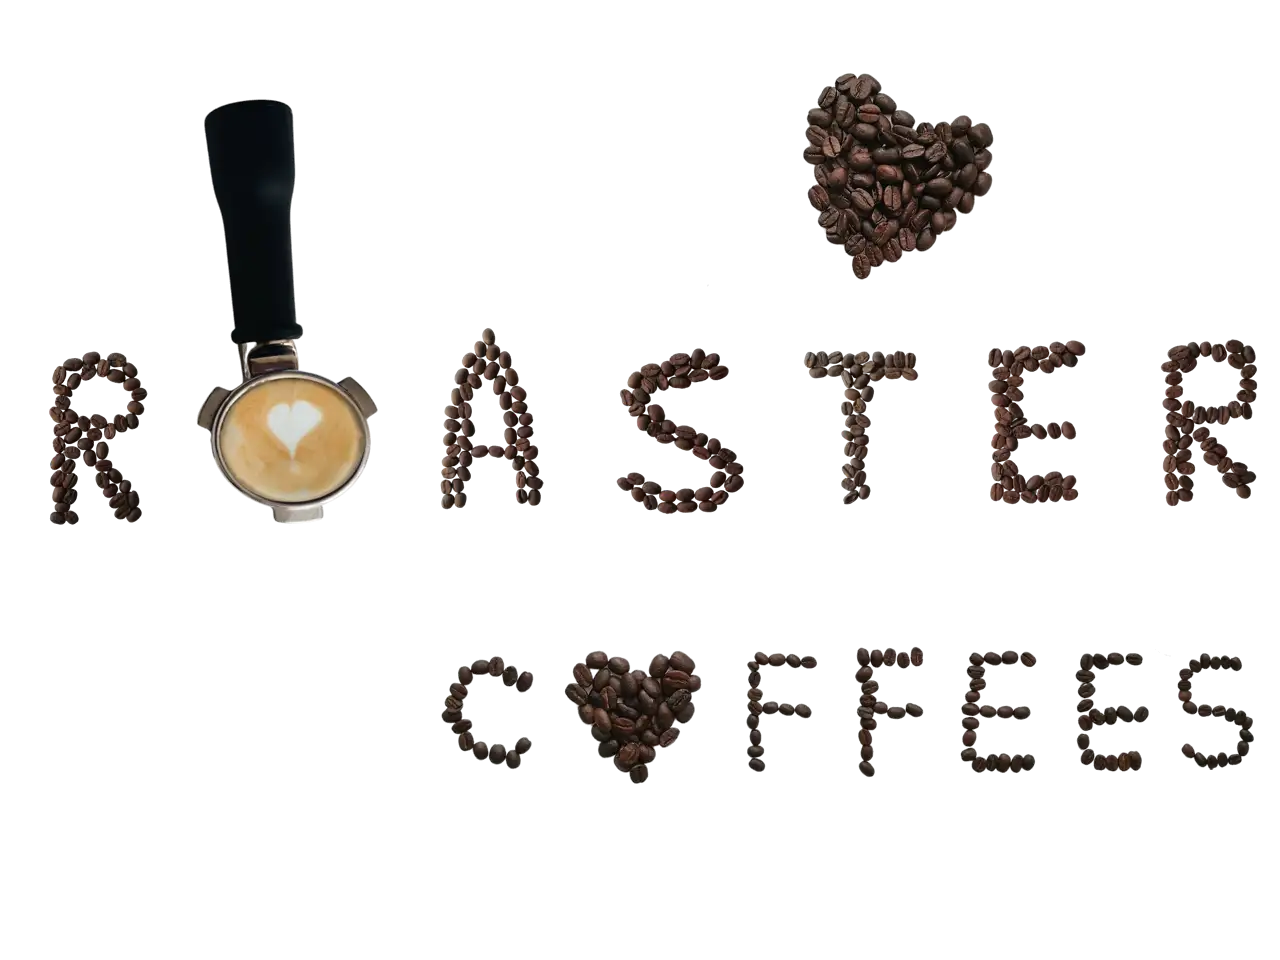 Some coffee beans are put together into 'ROASTERCOFFEES' and a heart shape